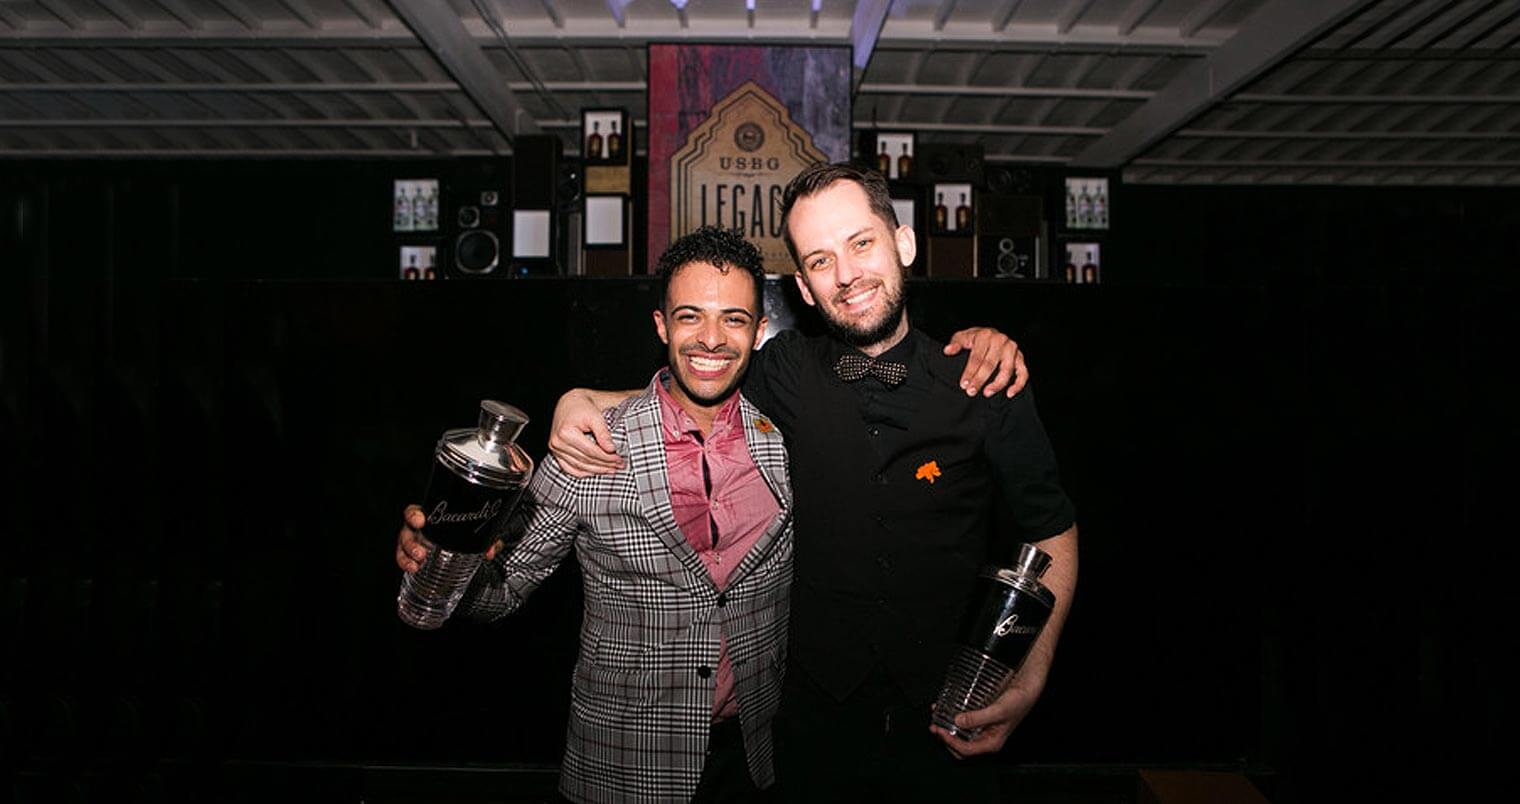 Two U.S. Finalists Moving On to BACARDÍ Legacy Global Cocktail Competition, featured image